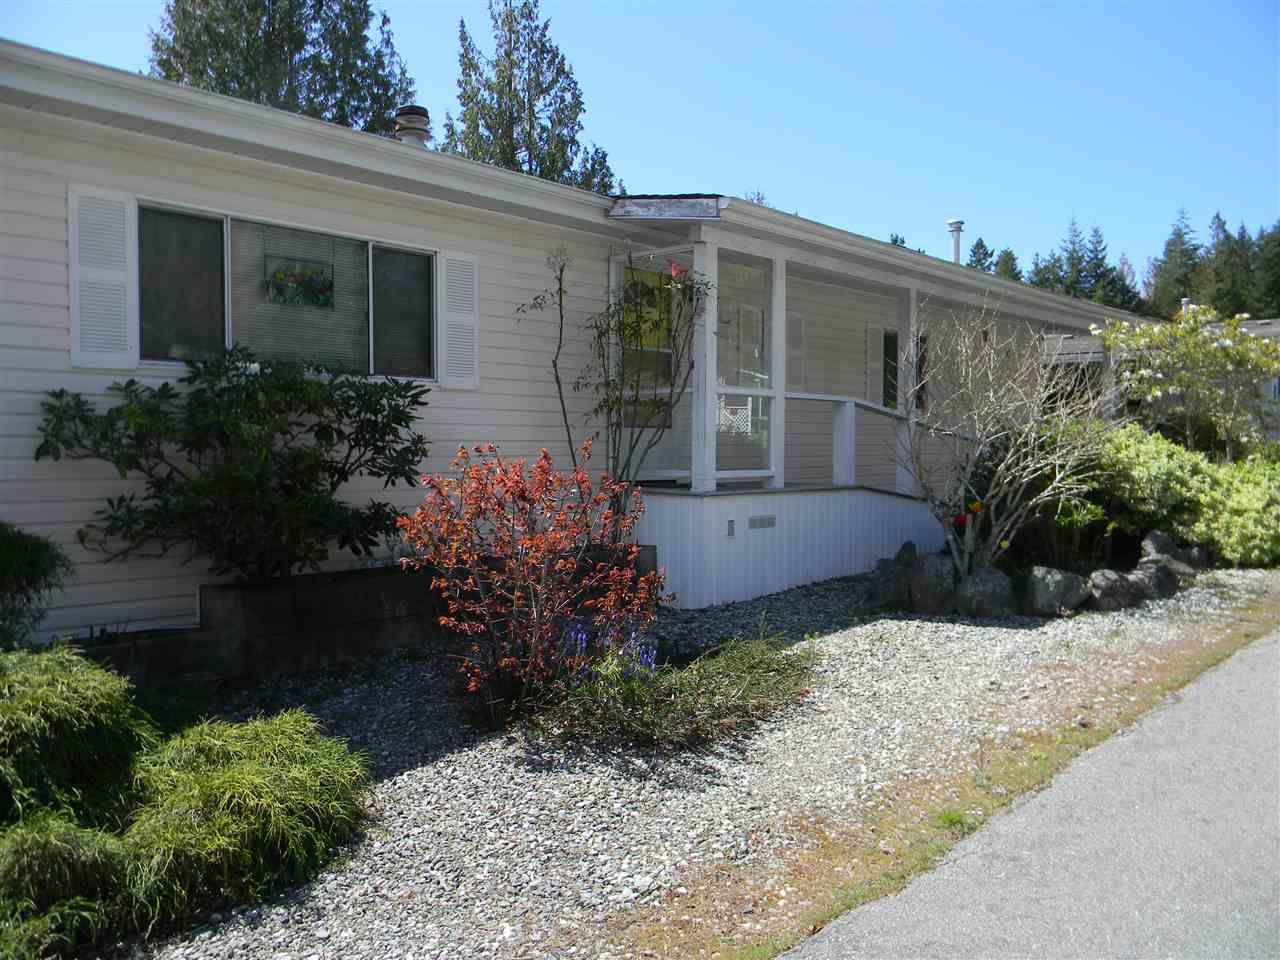 Sunny and bright one level double wide 2 bedroom, 2 full bath home in Rockland Wynd - one of the most desirable parks on the coast.